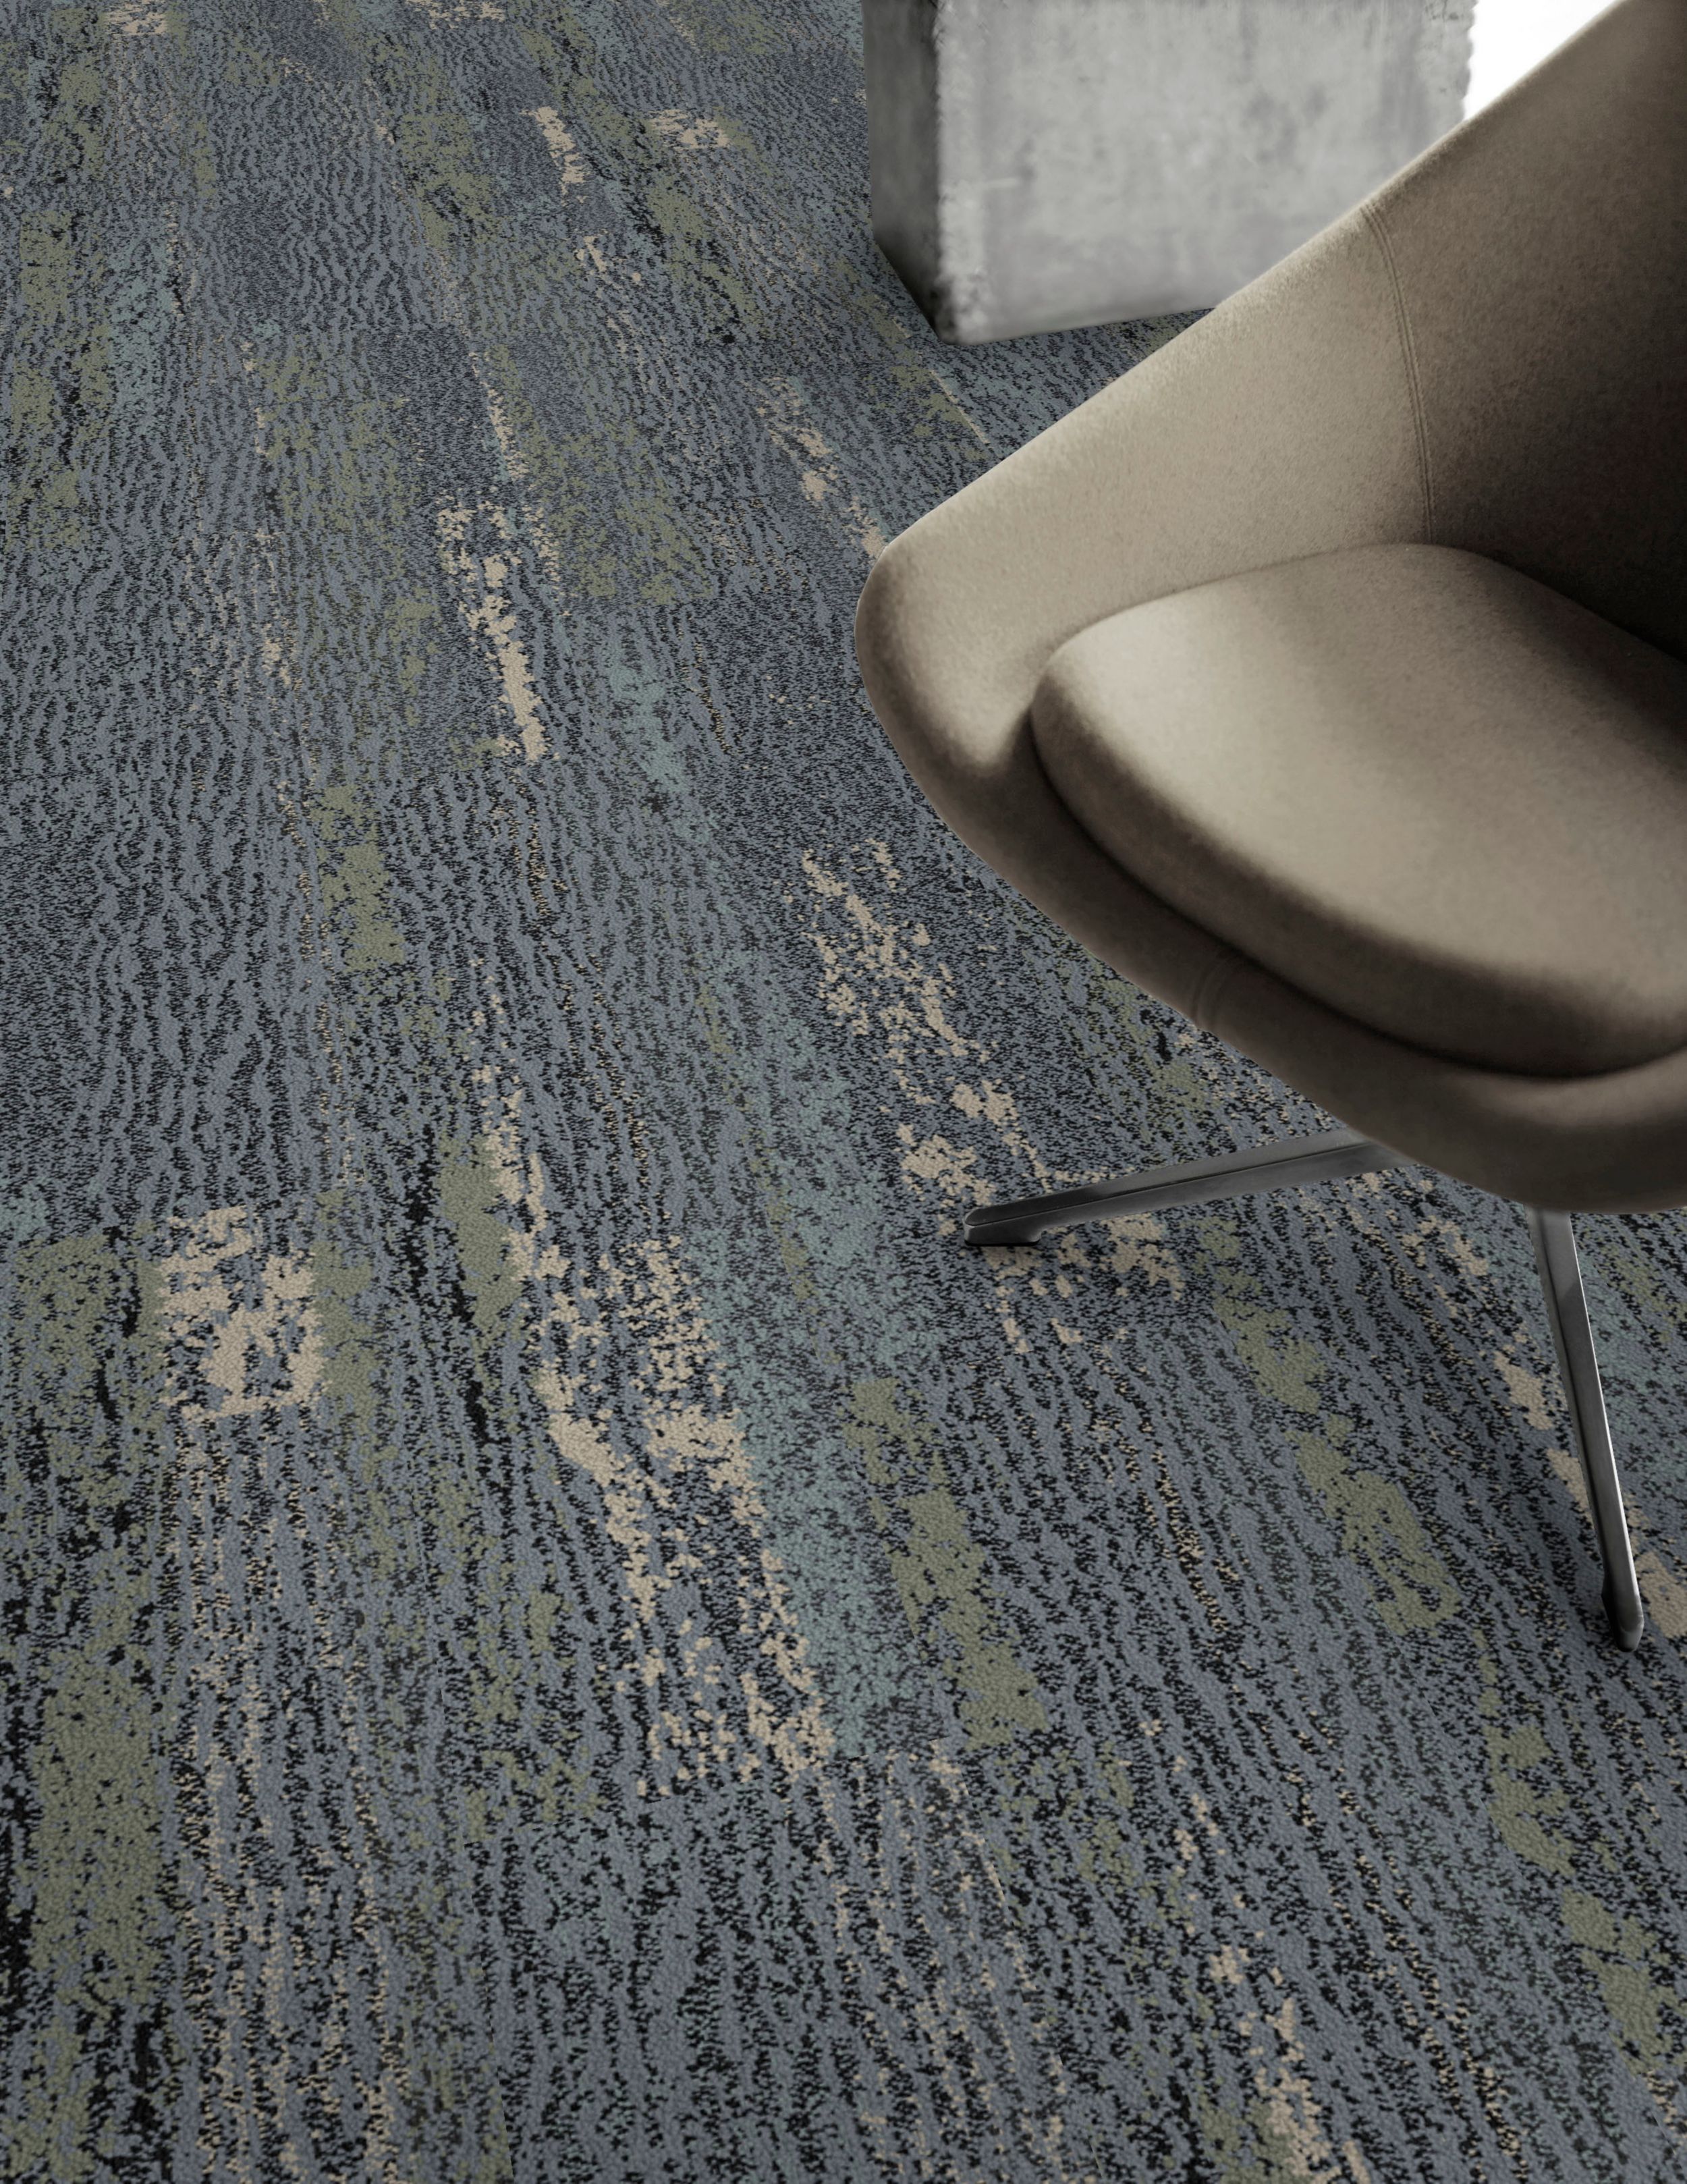 Detail of Interface Uprooted plank carpet tile with chair imagen número 5